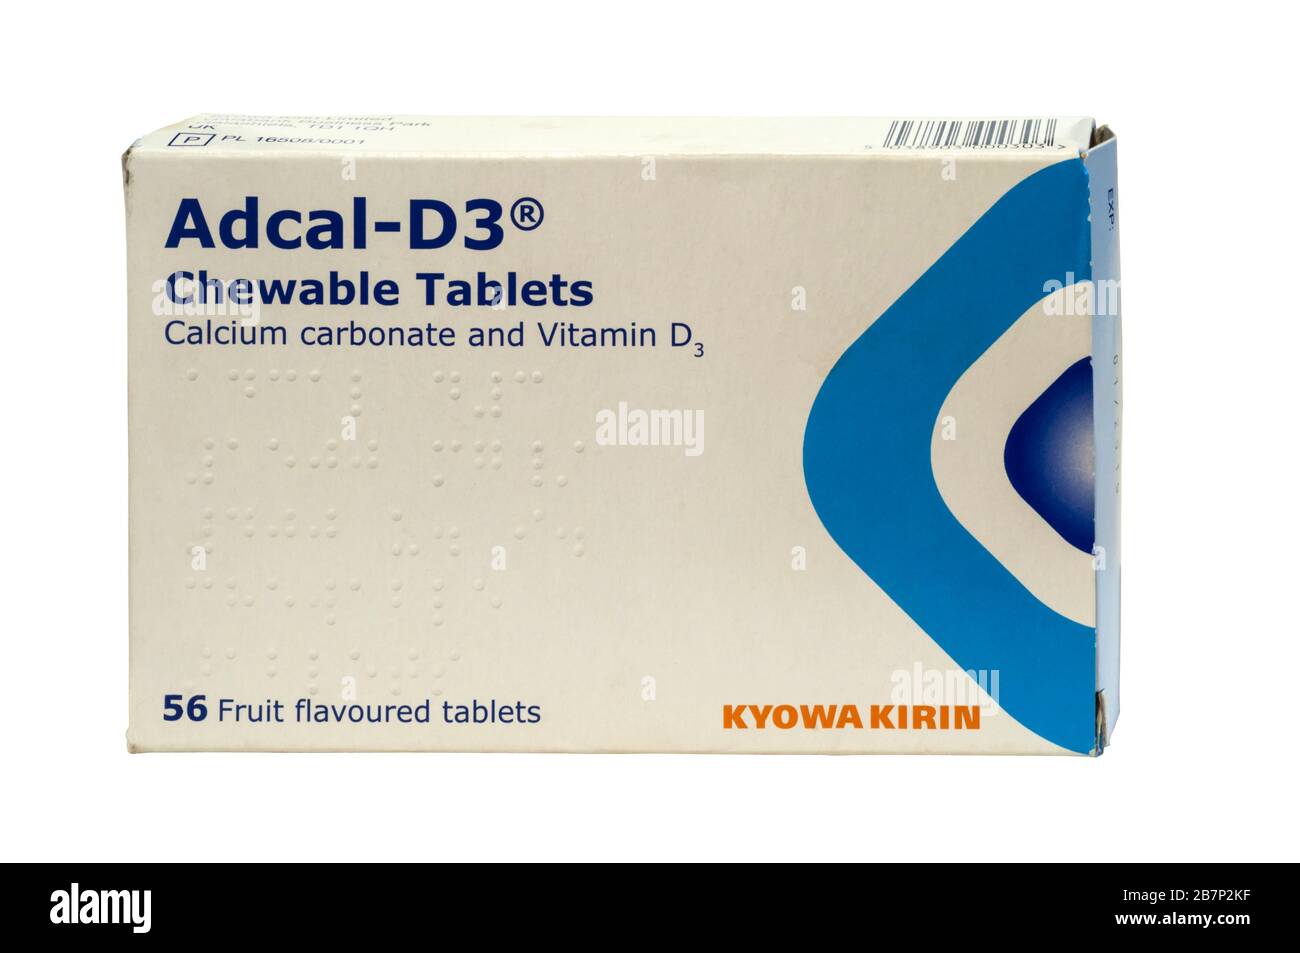 A packet of Adcal-D3 calcium carbonate & Vitamin D3 chewable tablets.  Used in treatment of osteoporosis. Stock Photo